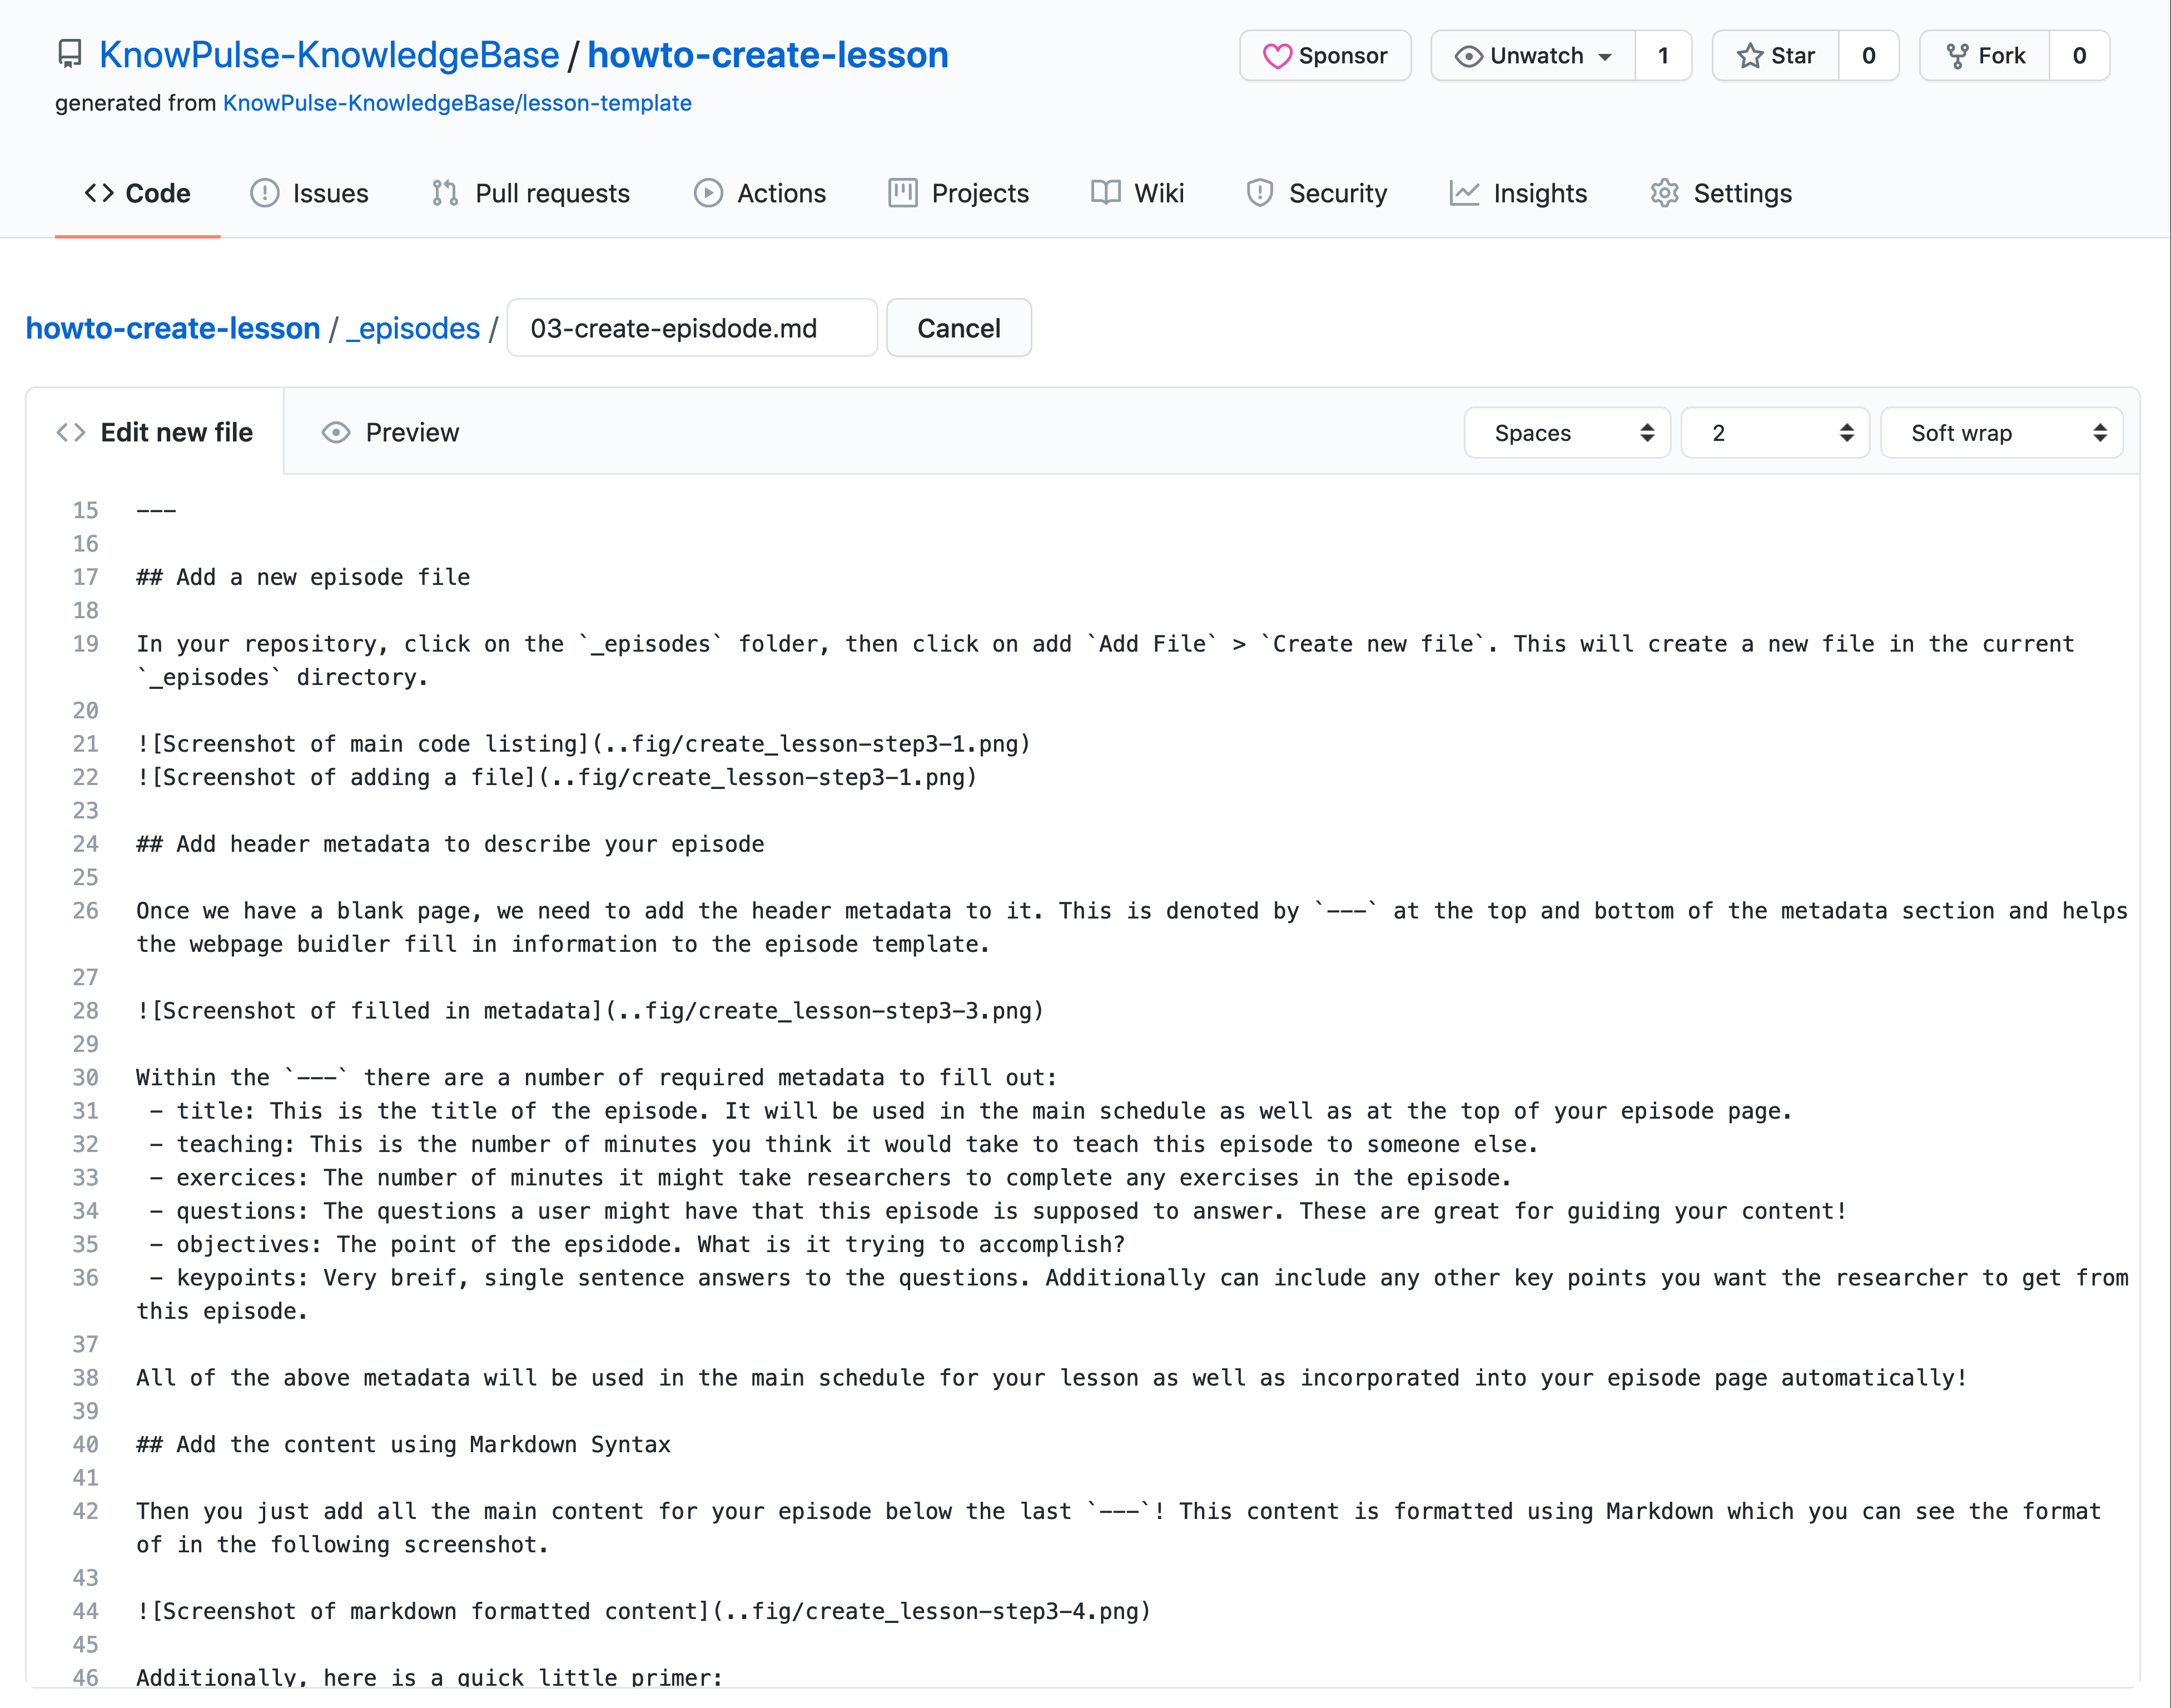 Screenshot of markdown formatted content